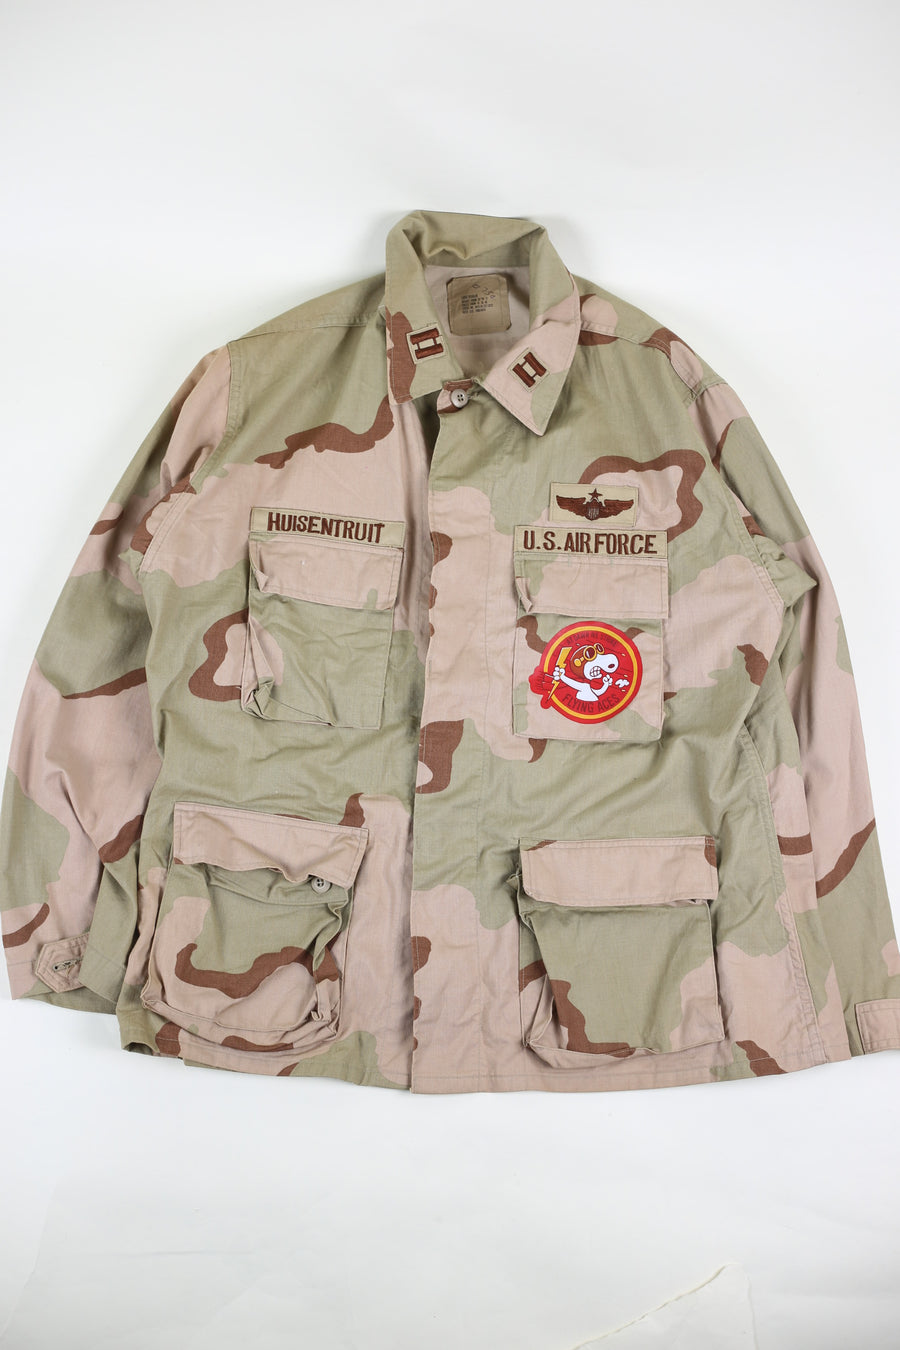 GIACCA CAMOUFLAGE  WOODLAND  Us Airforce   -  XL -